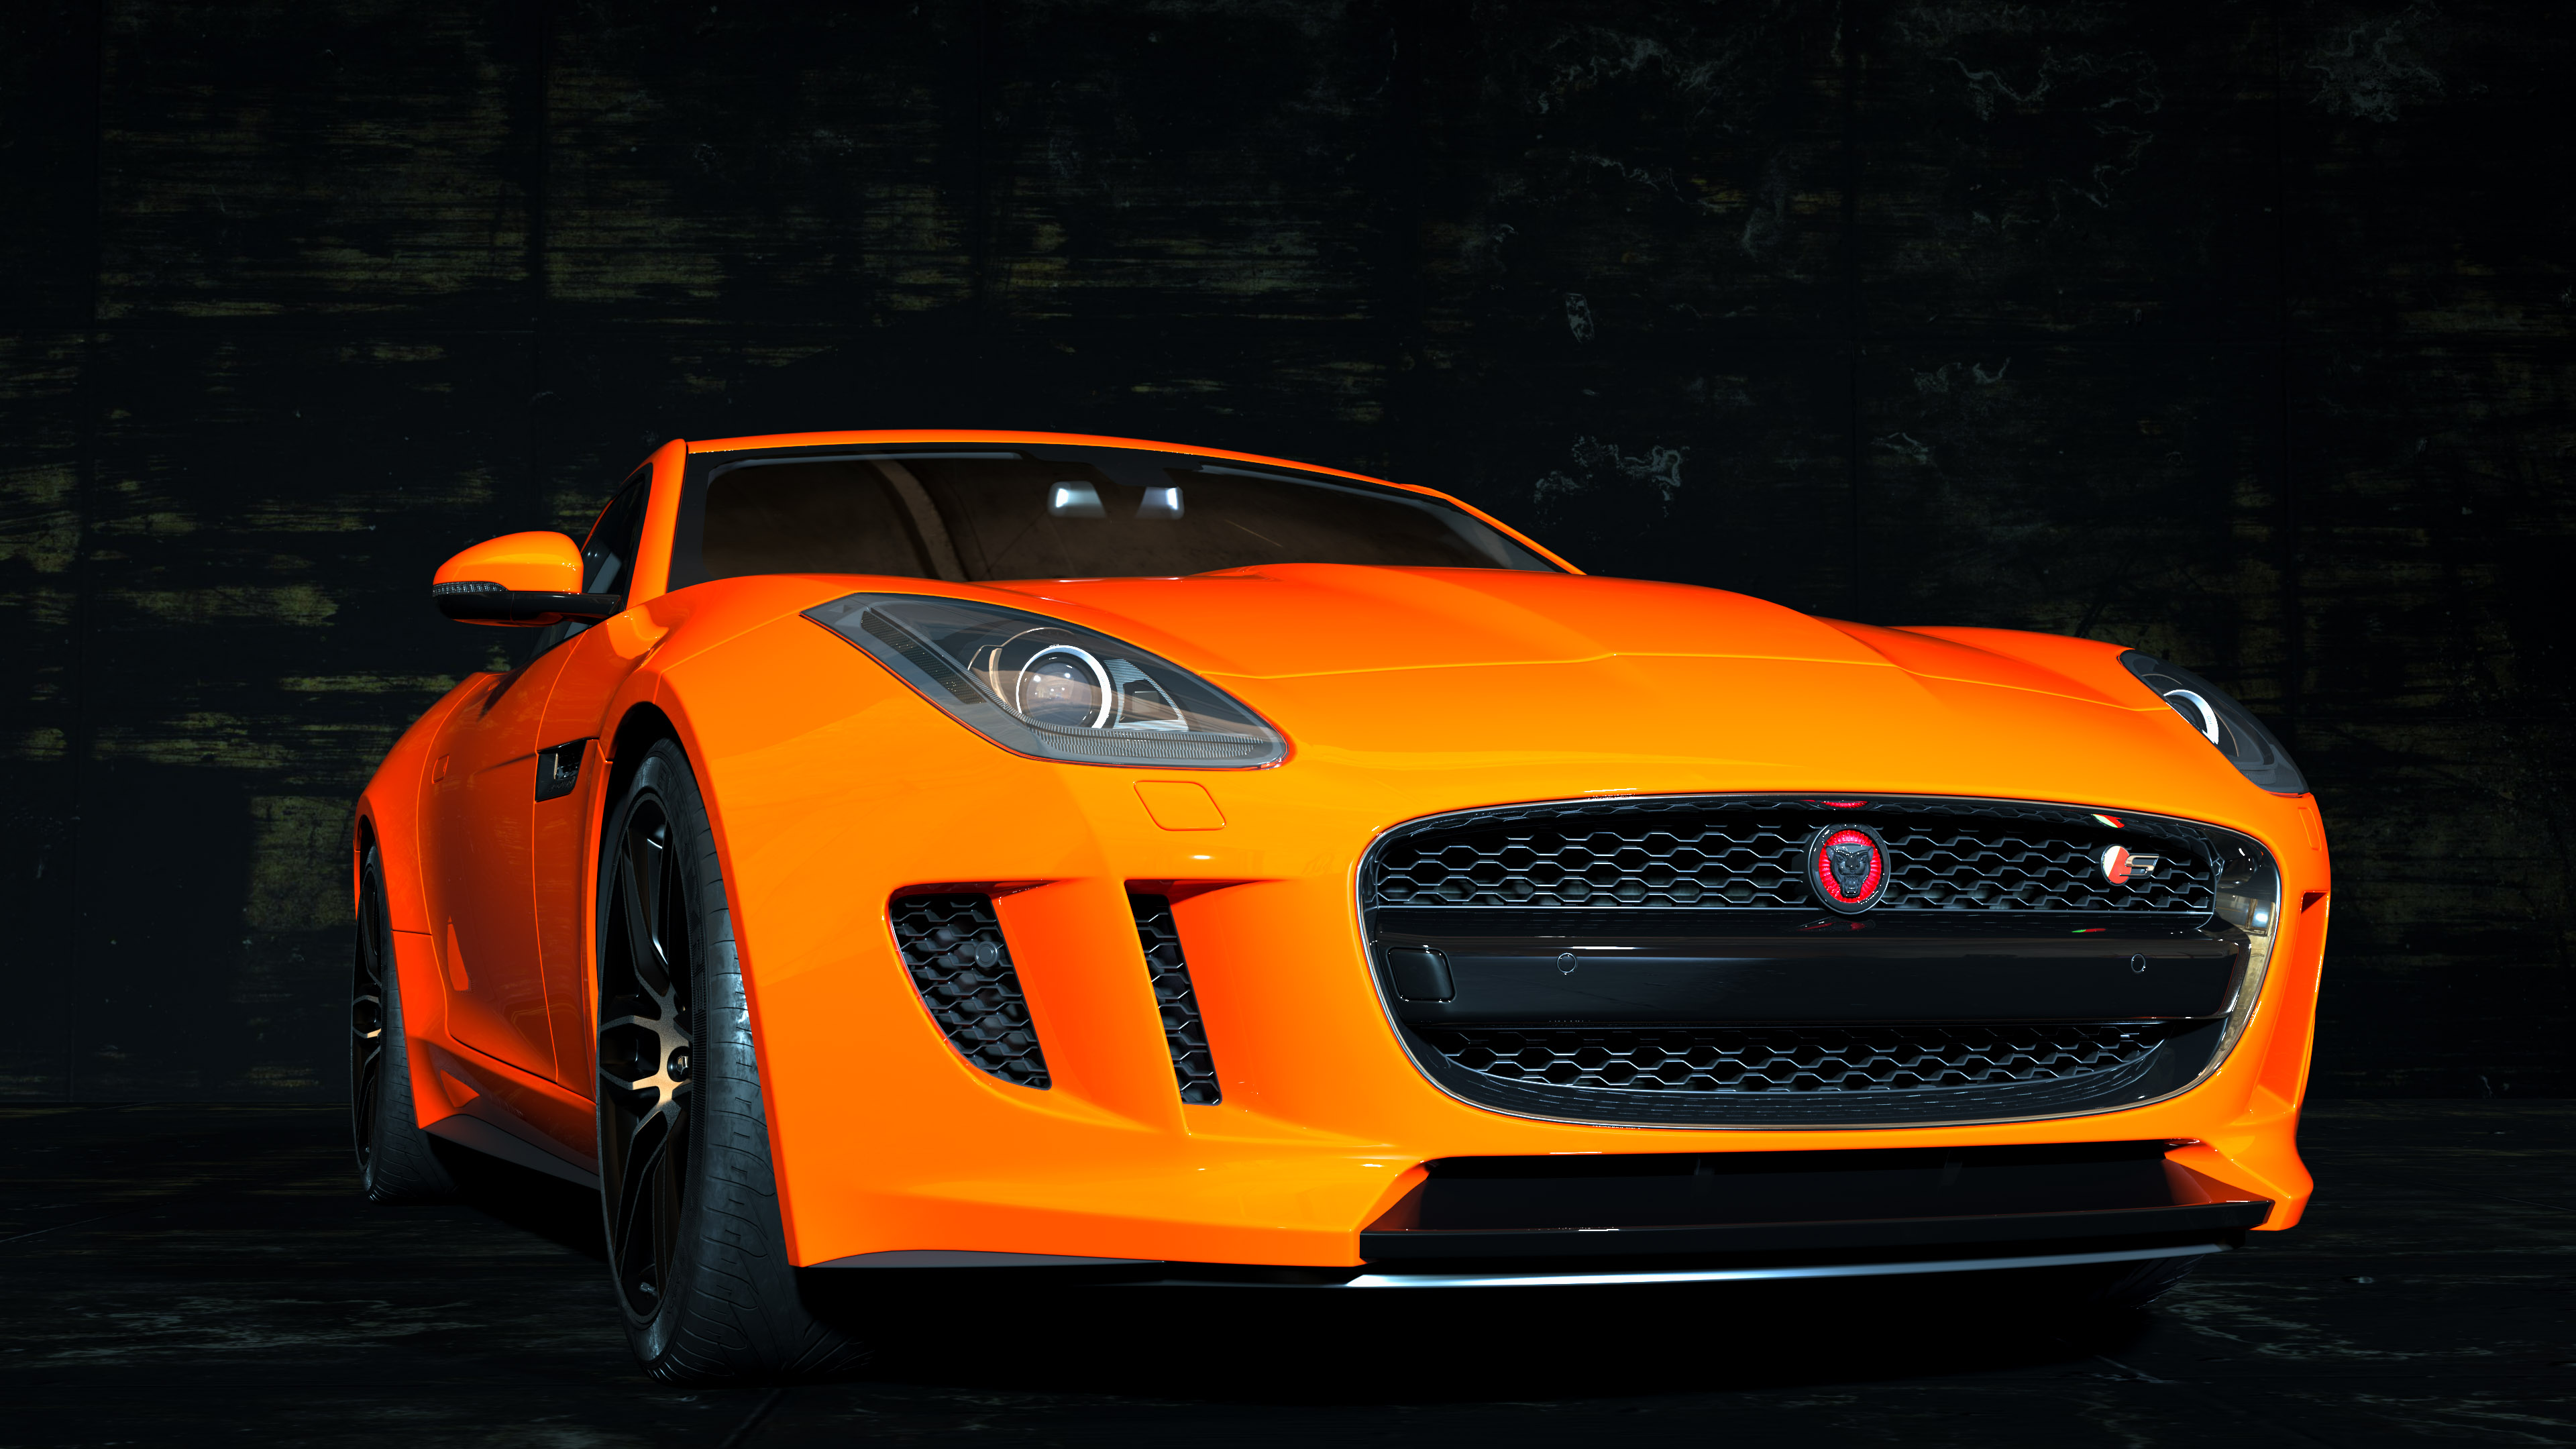 Immerse yourself in automotive elegance with the car wallpaper, featuring the Jaguar F-Type sport car, capturing the essence of sleek design and dynamic performance.